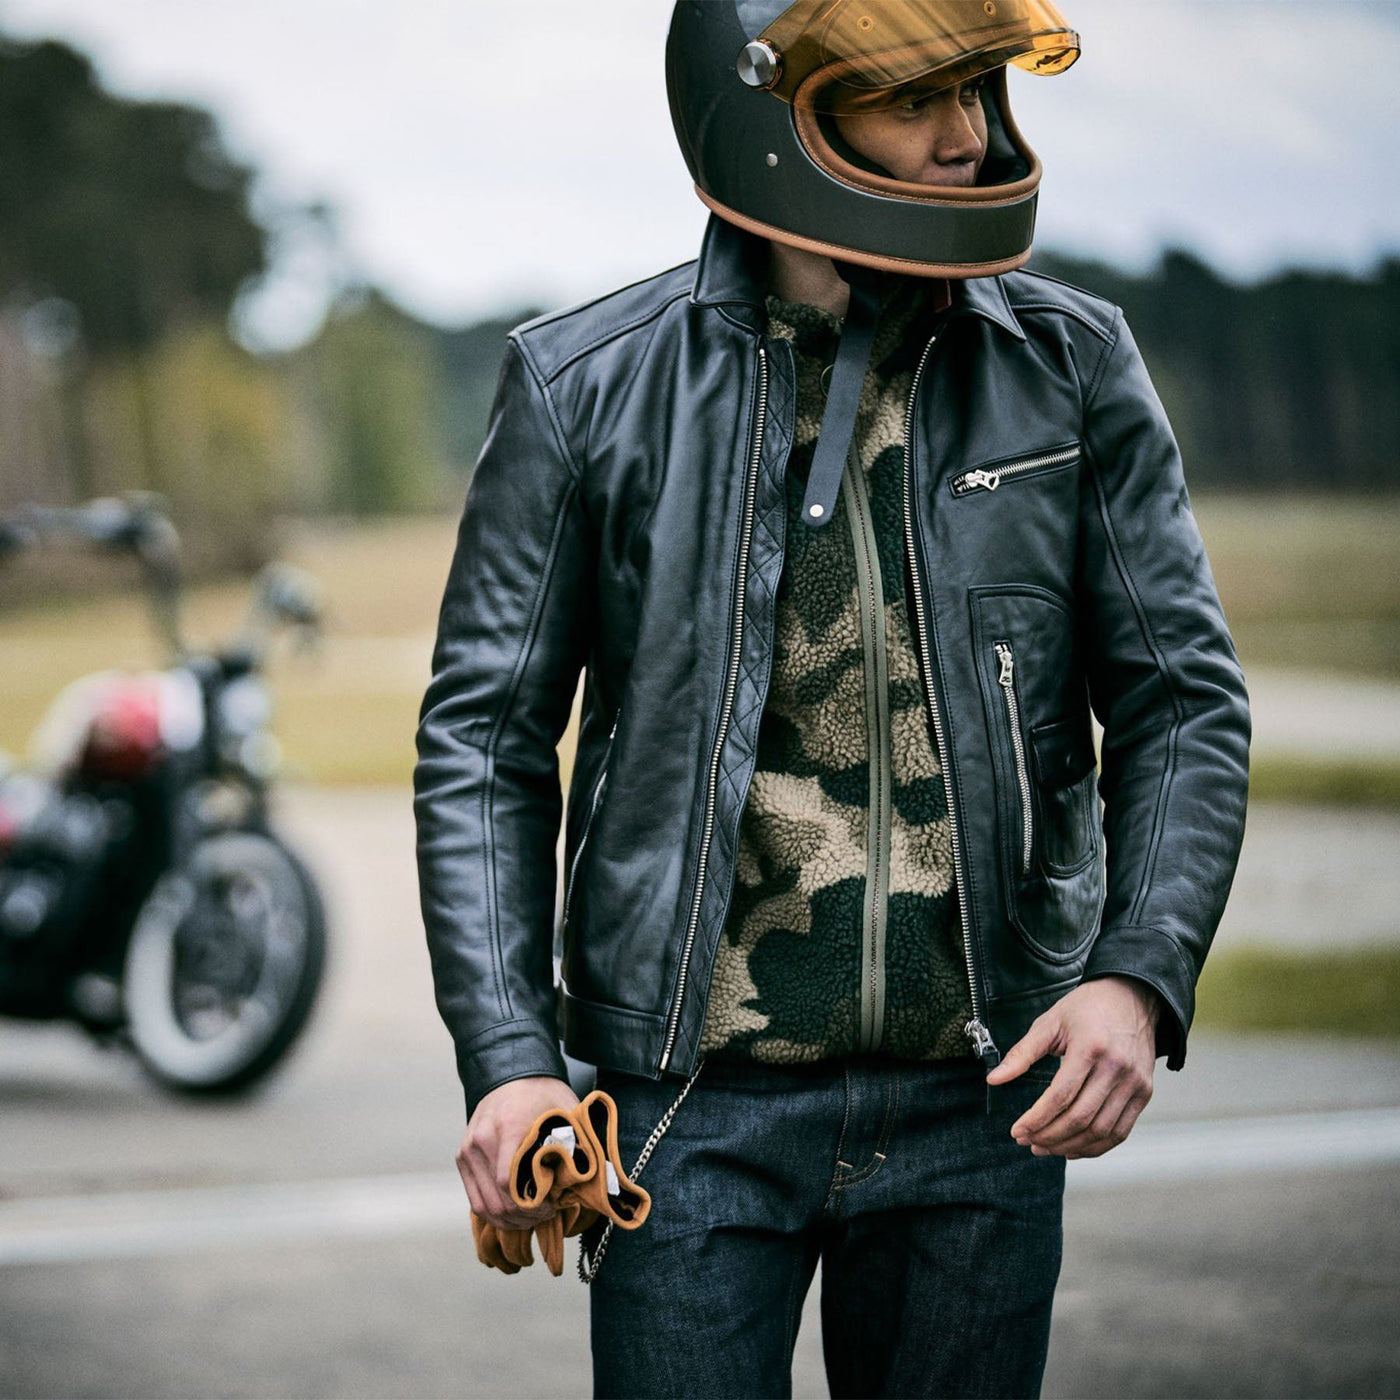 World Of Triumph | Motorcycle Parts, Clothing & Accessories Worldwide